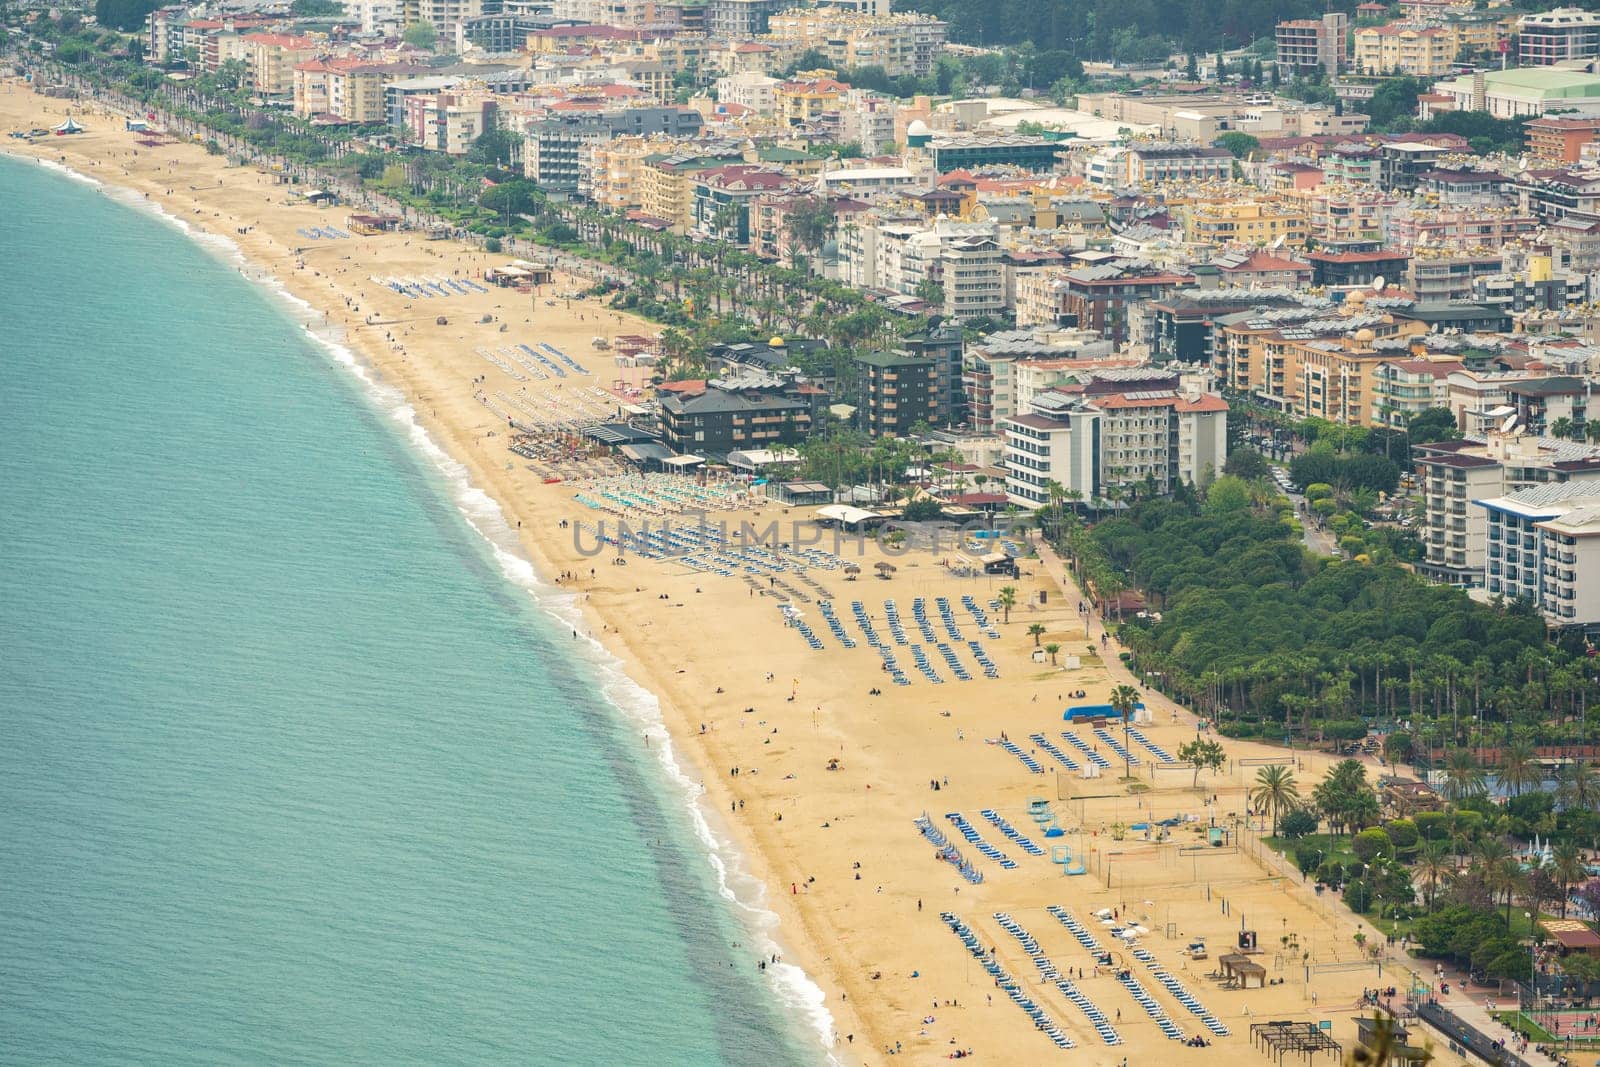 View of Cleopatra beach in Alanya, one of the touristic districts of Antalya, from Alanya Castle by Sonat